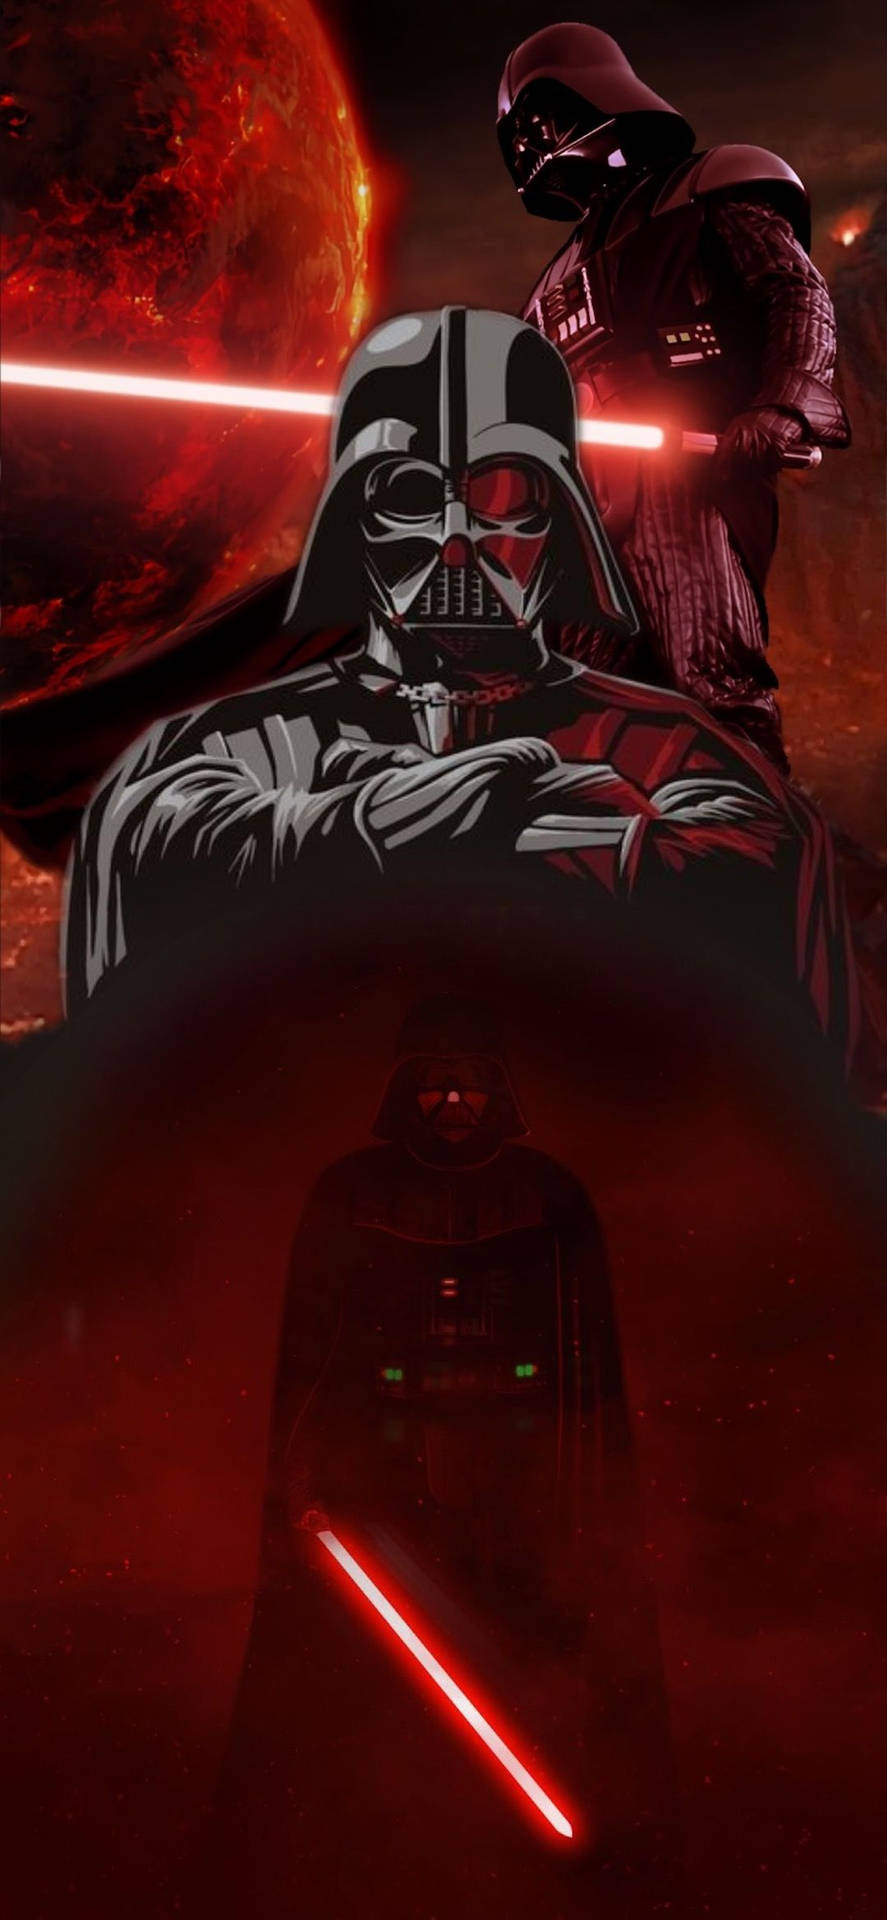 Feel the power of the dark side with Darth Vader. Wallpaper